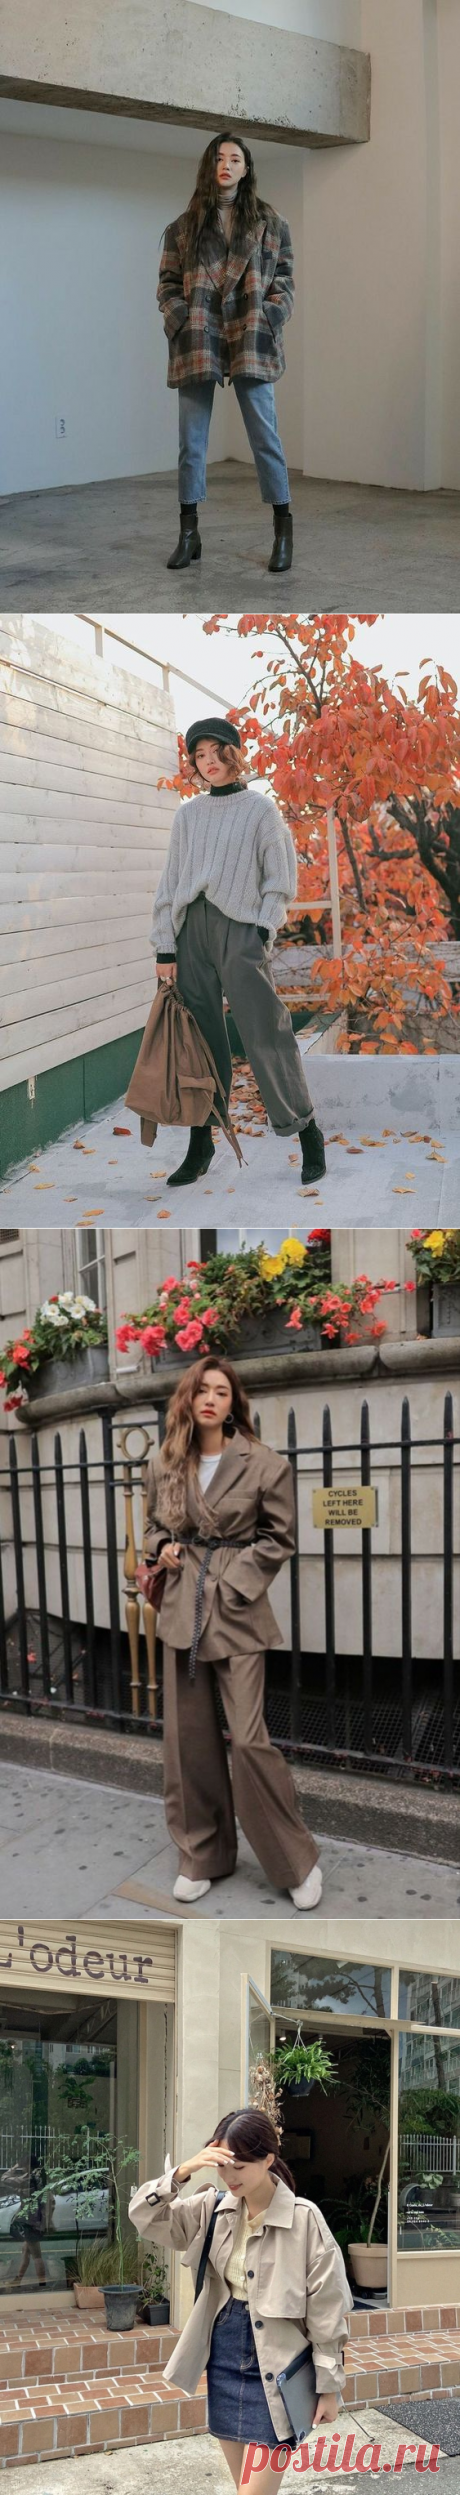 Chic Fall Outfit Trends Inspired By Korean Fashion Girls | Fashion Blog &amp; Magazine